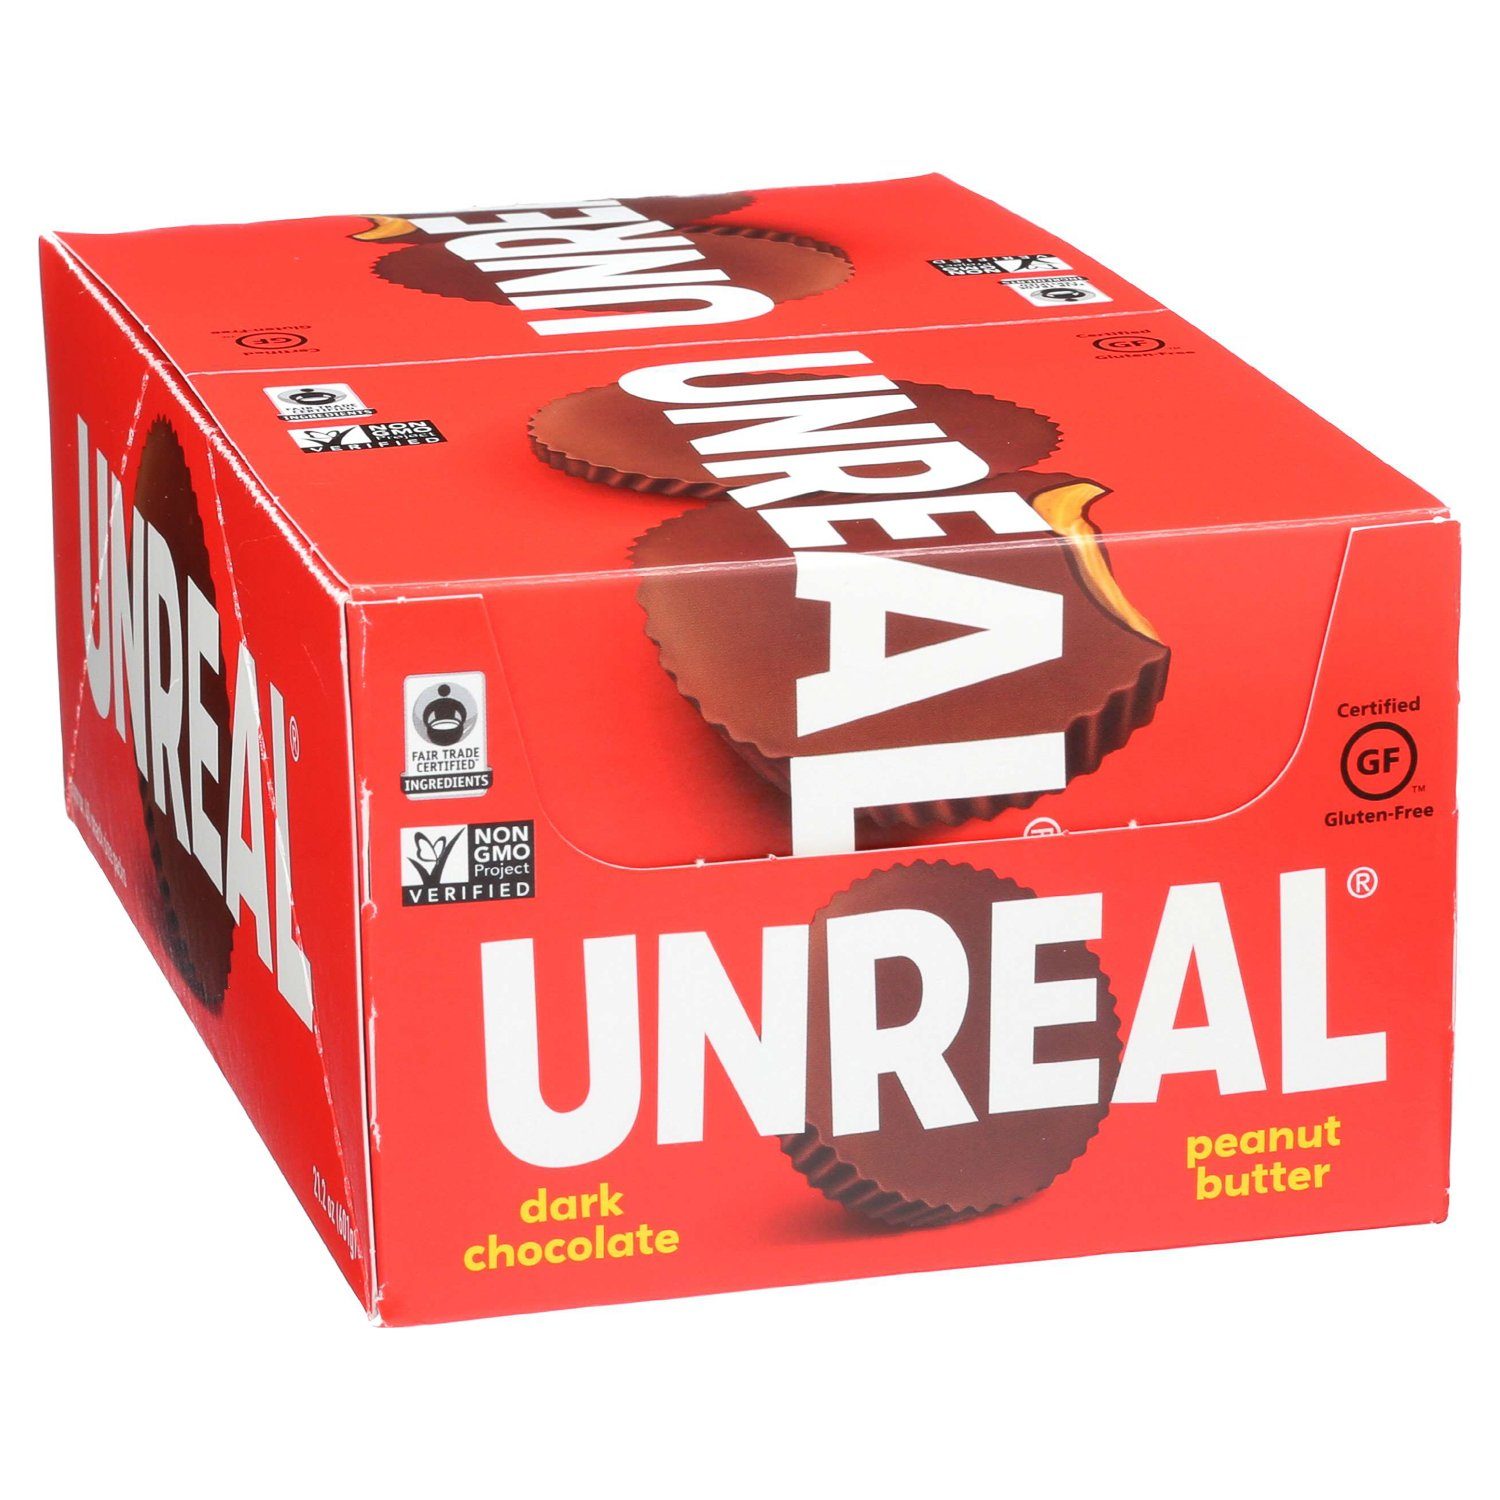 UNREAL Dark Chocolate Butter Cups Meltable UNREAL Peanut Butter 0.5 Oz-40 Count 